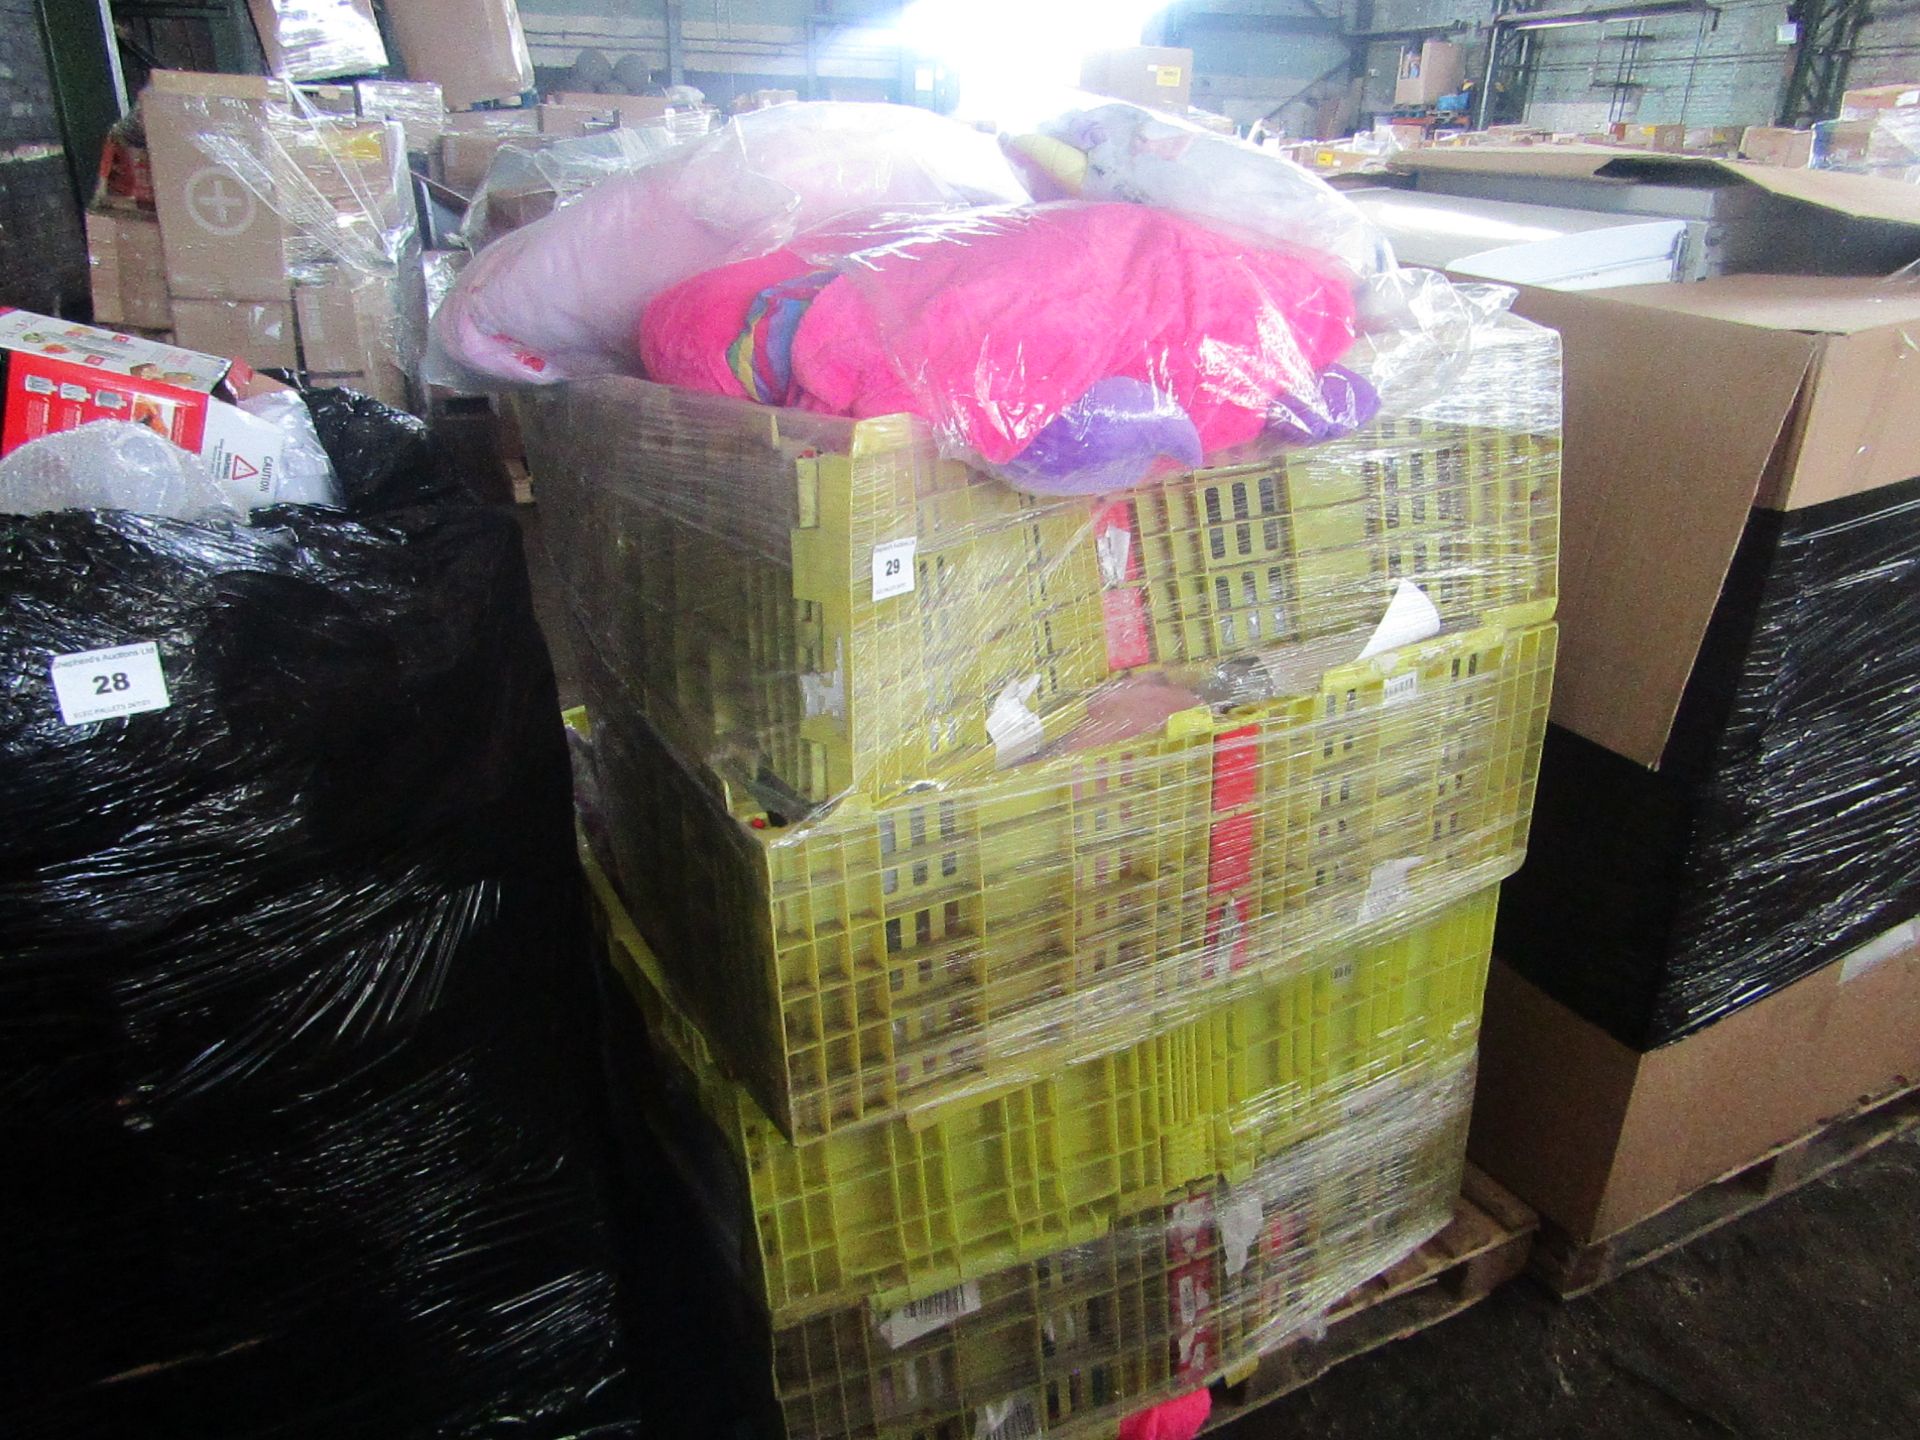 | 1X | PALLET OF FAULTY / MISSING PARTS / DAMAGED RAW CUSTOMER RETURNS HAPPY NAPPERS SLEEPING BAGS